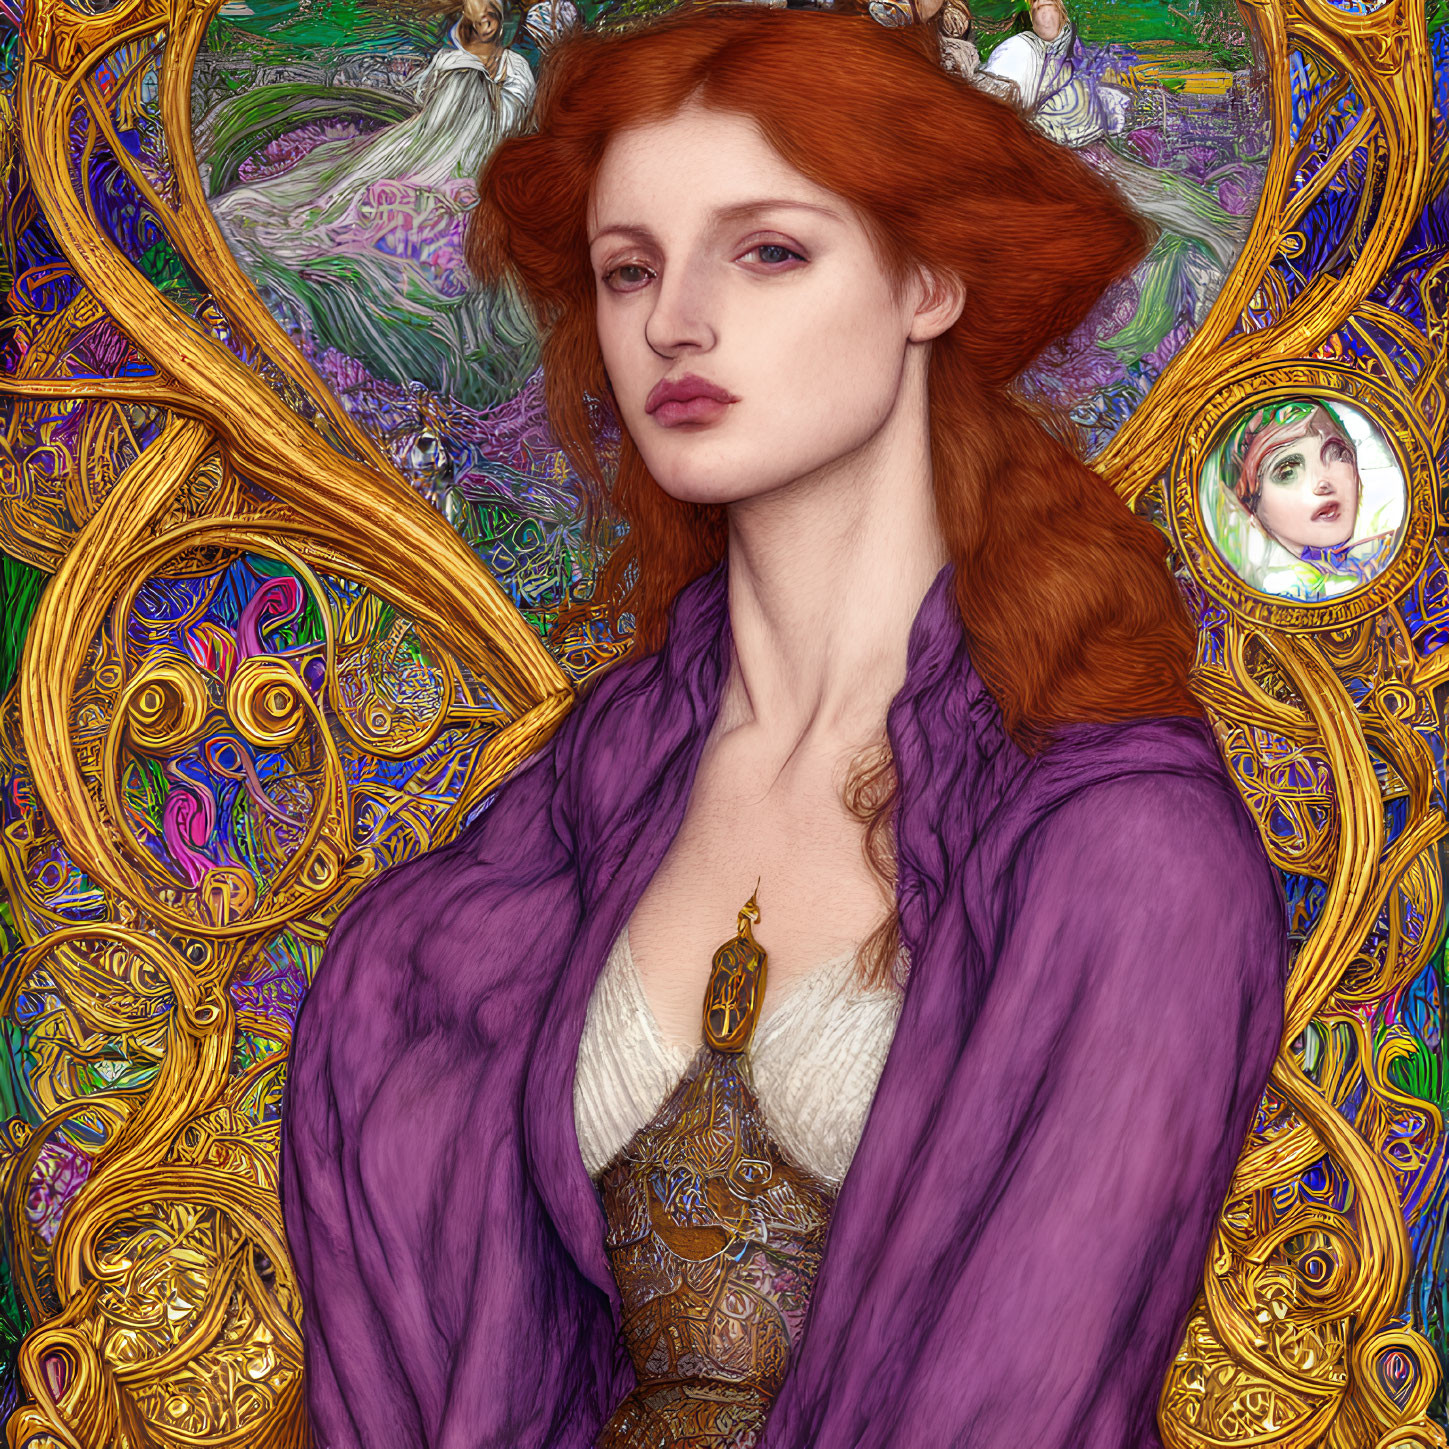 Art Nouveau Image of Woman with Red Hair and Decorative Patterns